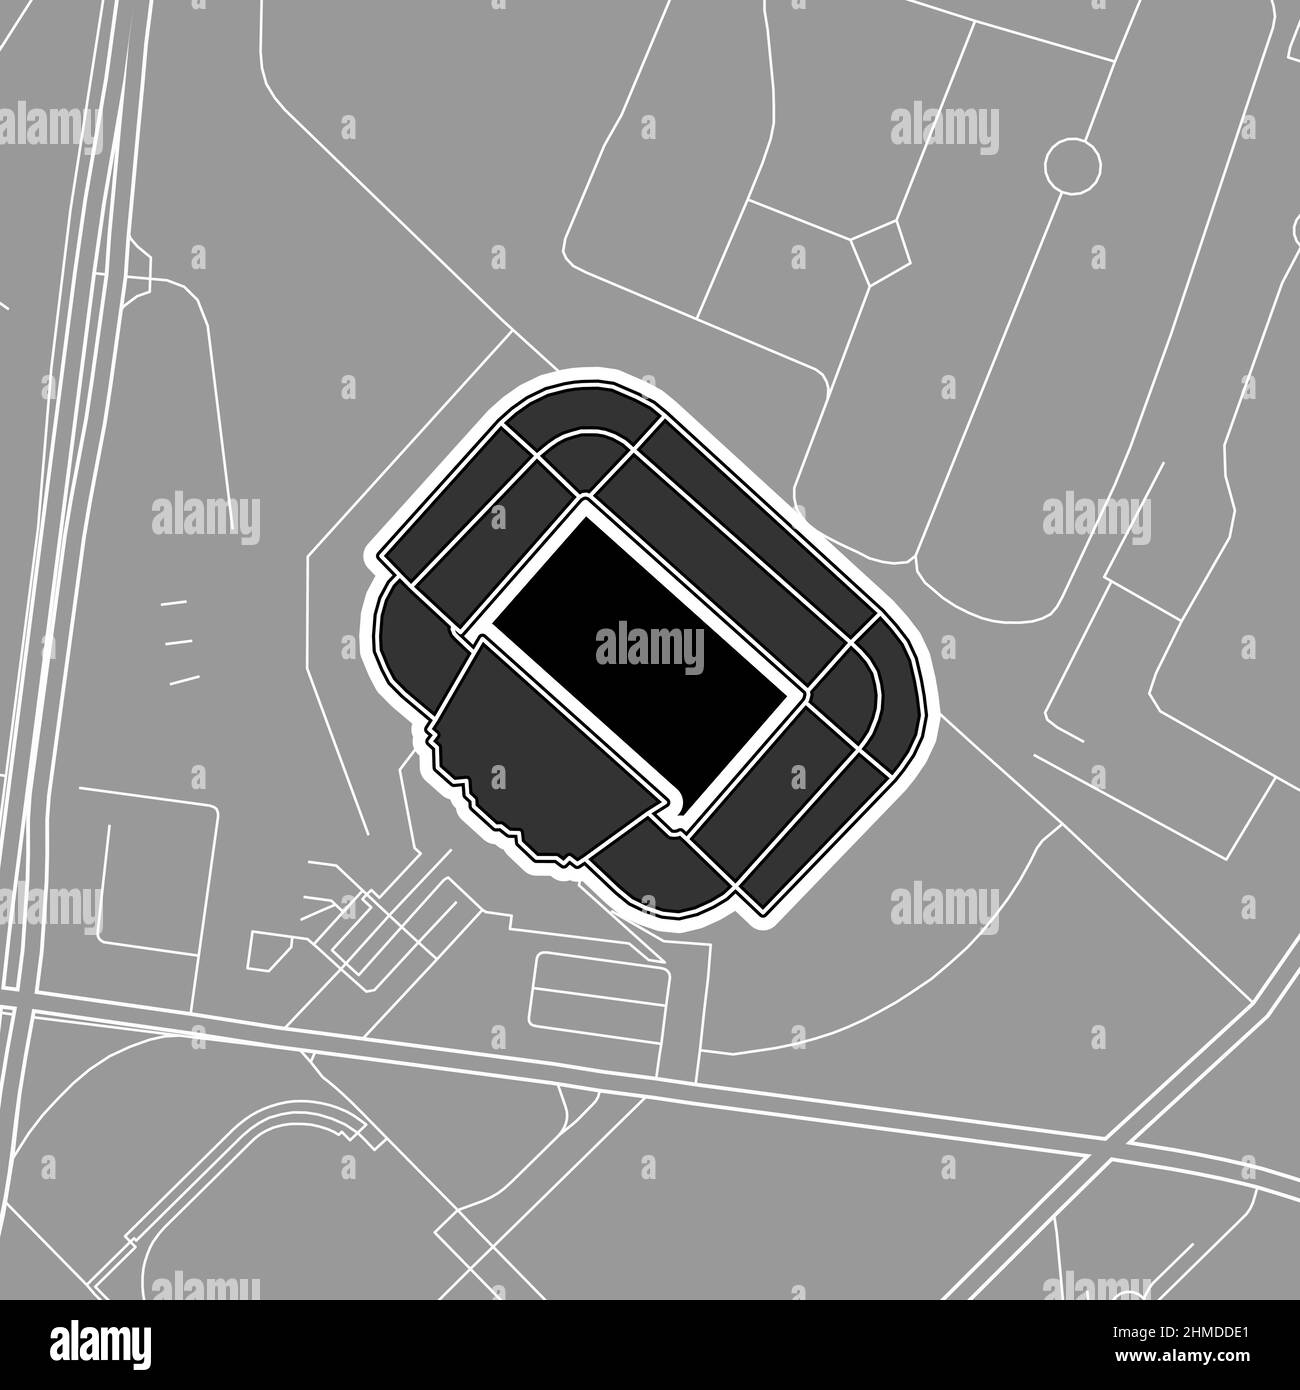 Glasgow, Baseball MLB Stadium, outline vector map. The baseball statium map was drawn with white areas and lines for main roads, side roads. Stock Vector